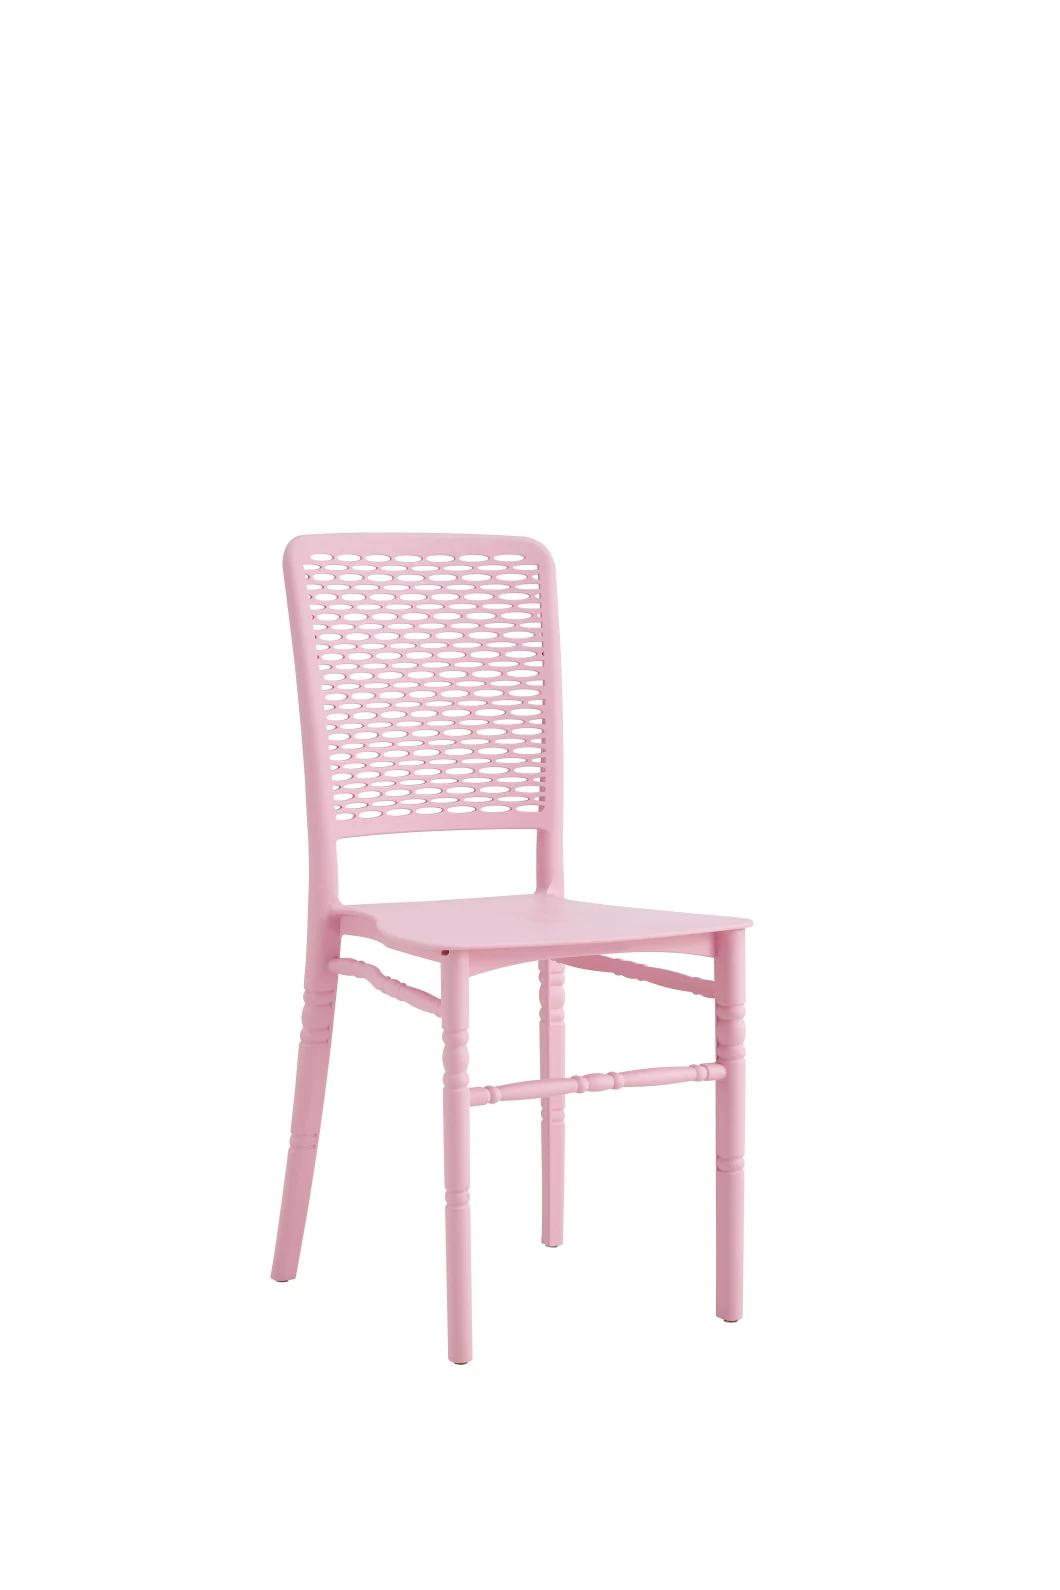 Cheap Plastic Chair for Garden Stackable Outdoor Chair PP Leisure Dining Chair with Arm